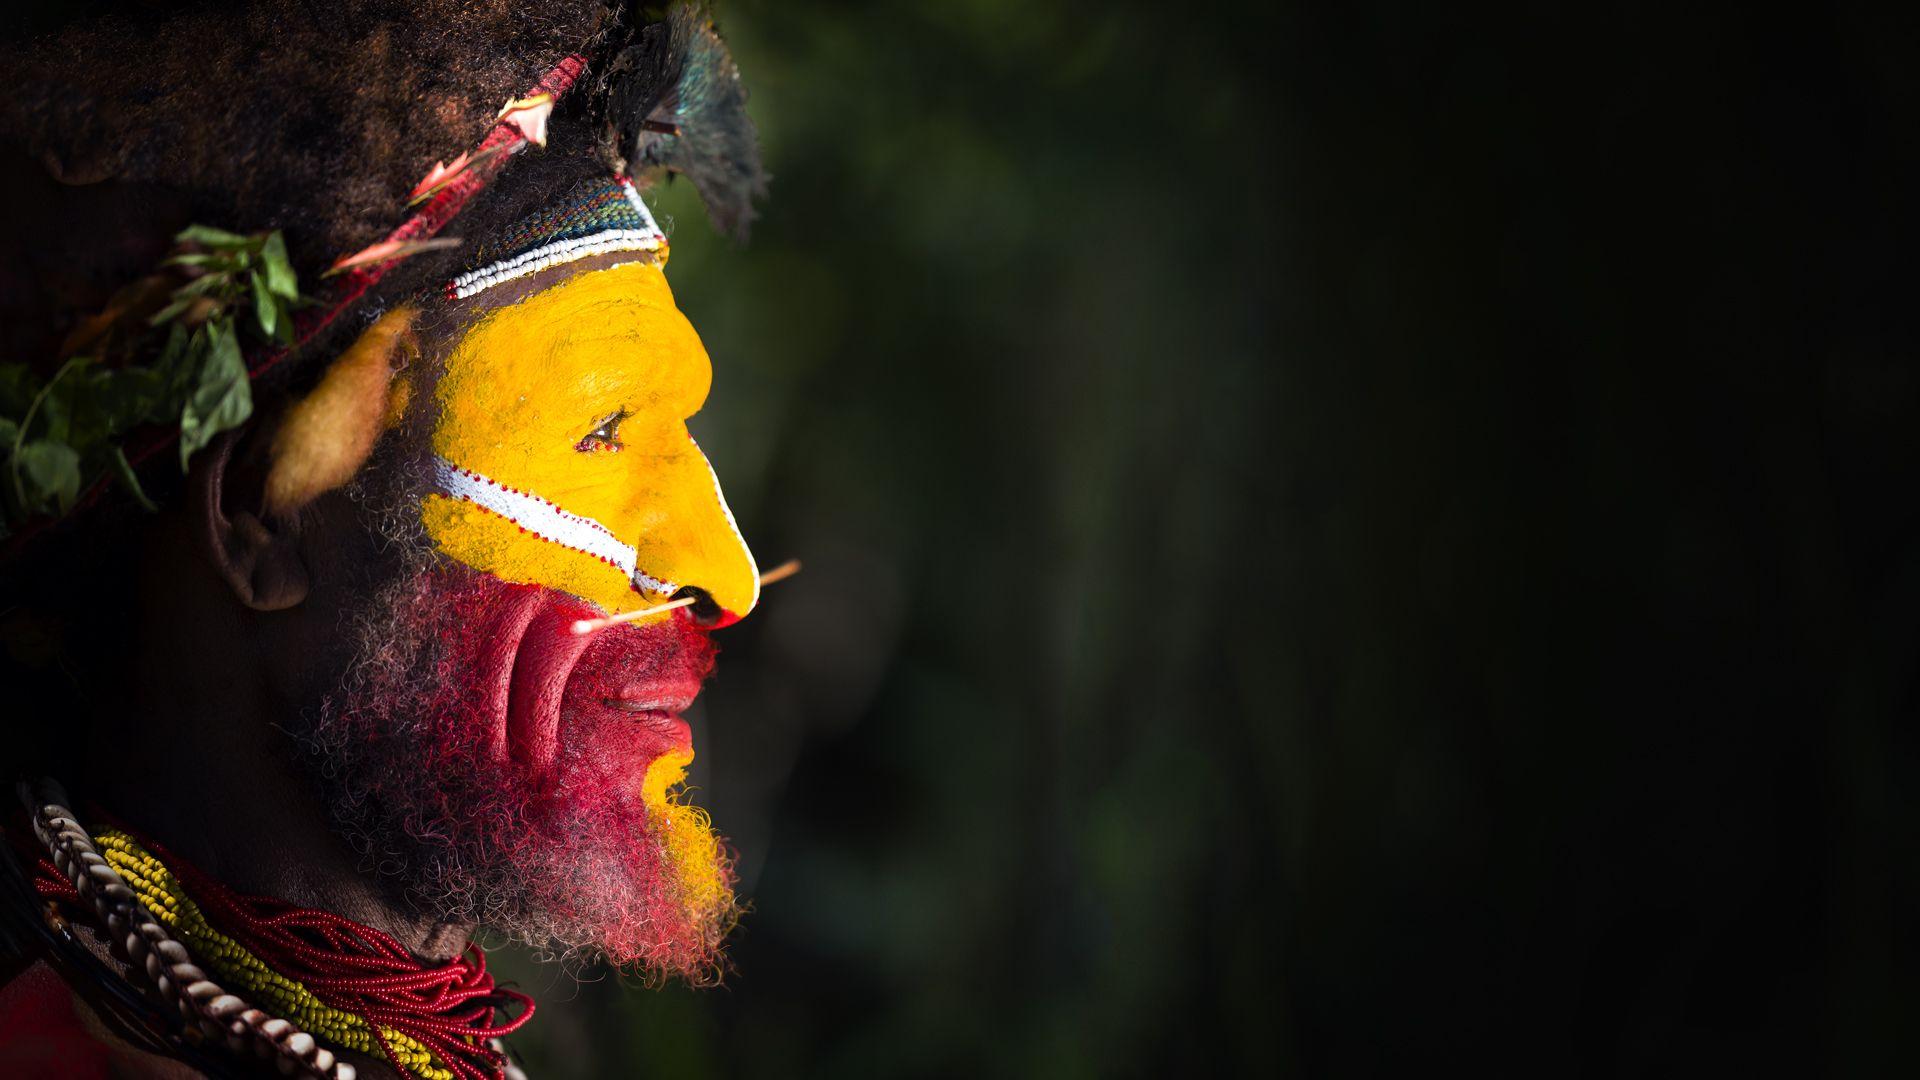 Adventures in Photography: Papua New Guinea with Chris McLennan